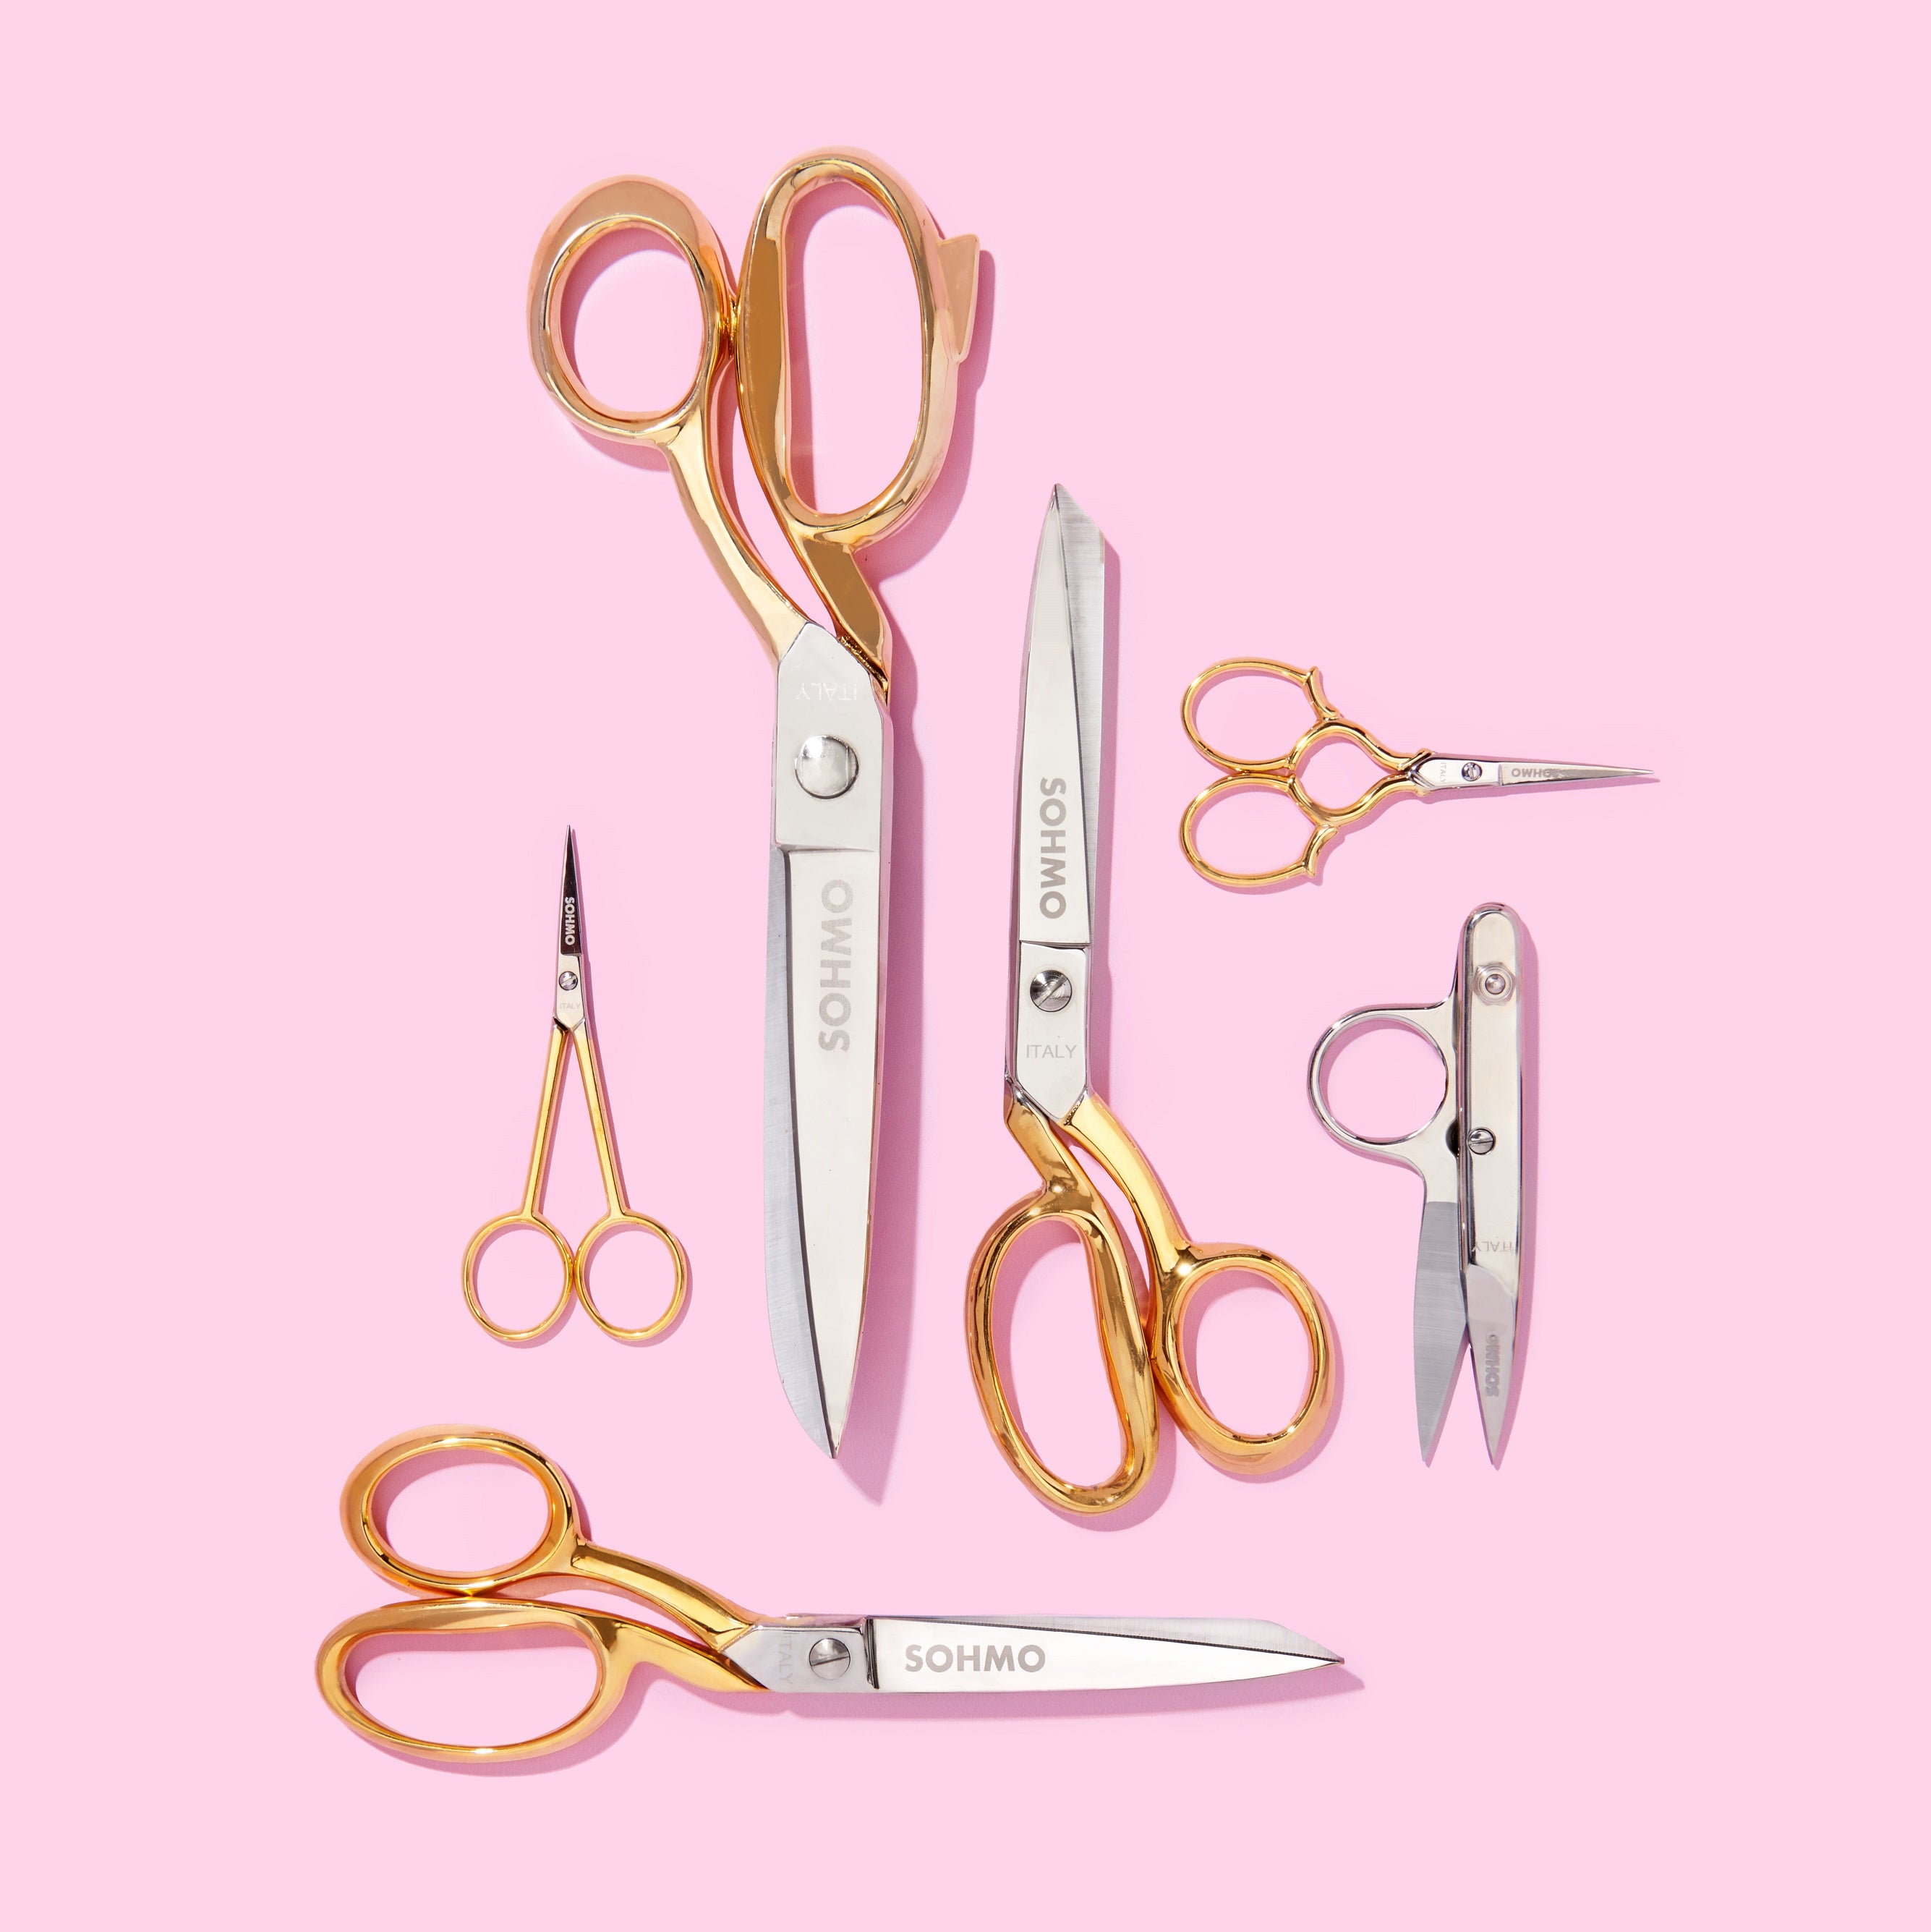 Gold fabric scissors and embroidery scissors